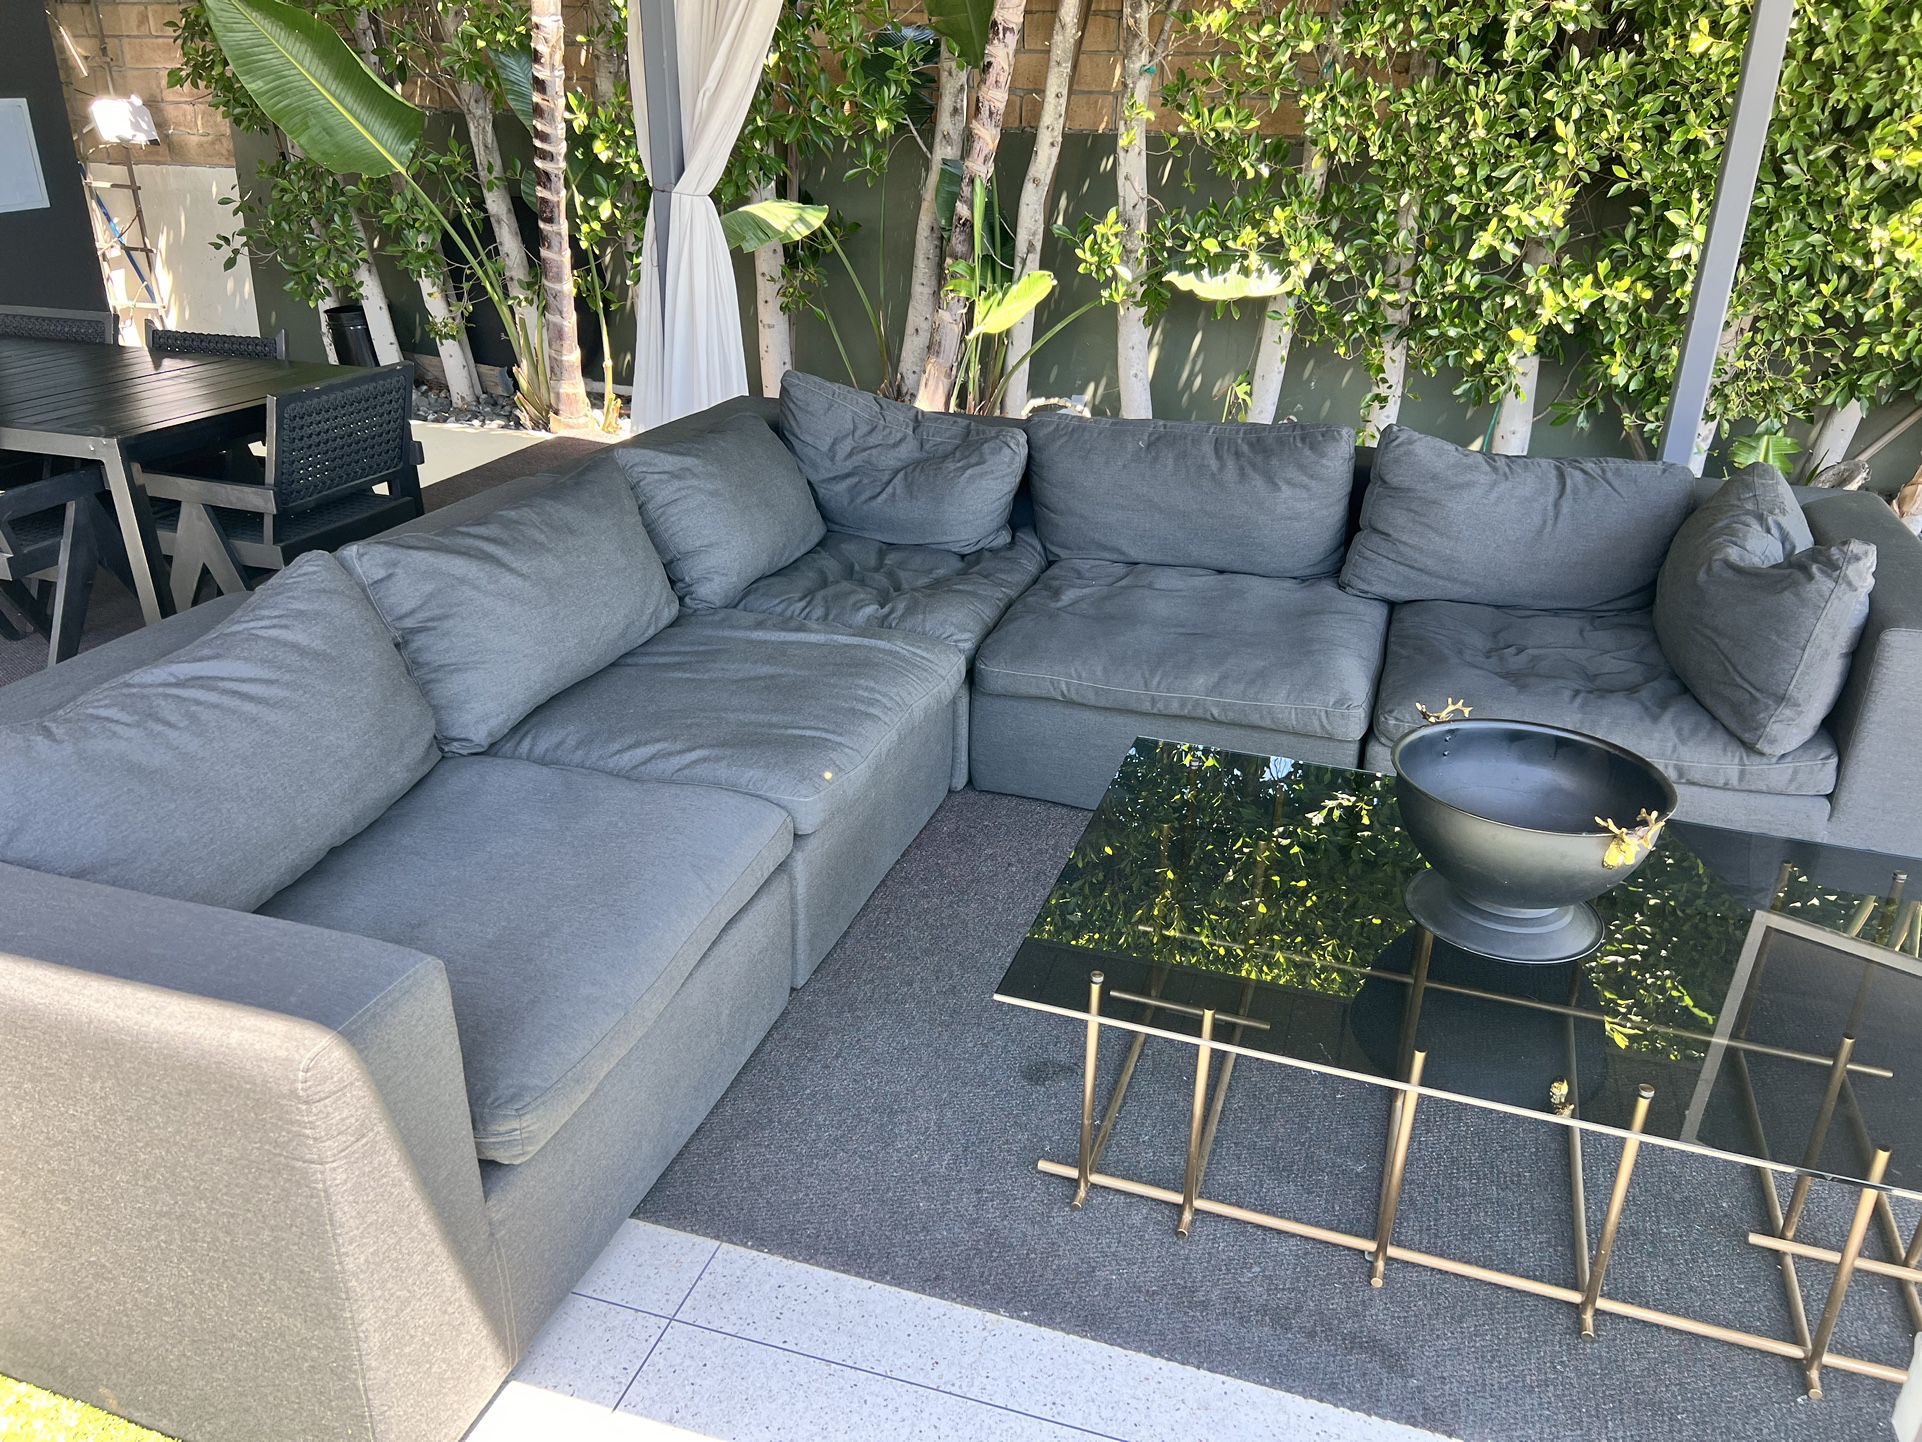 Outdoor Couch : Plush Standard Modular Down Filled Cloud-Like Comfort Overstuffed Sectional